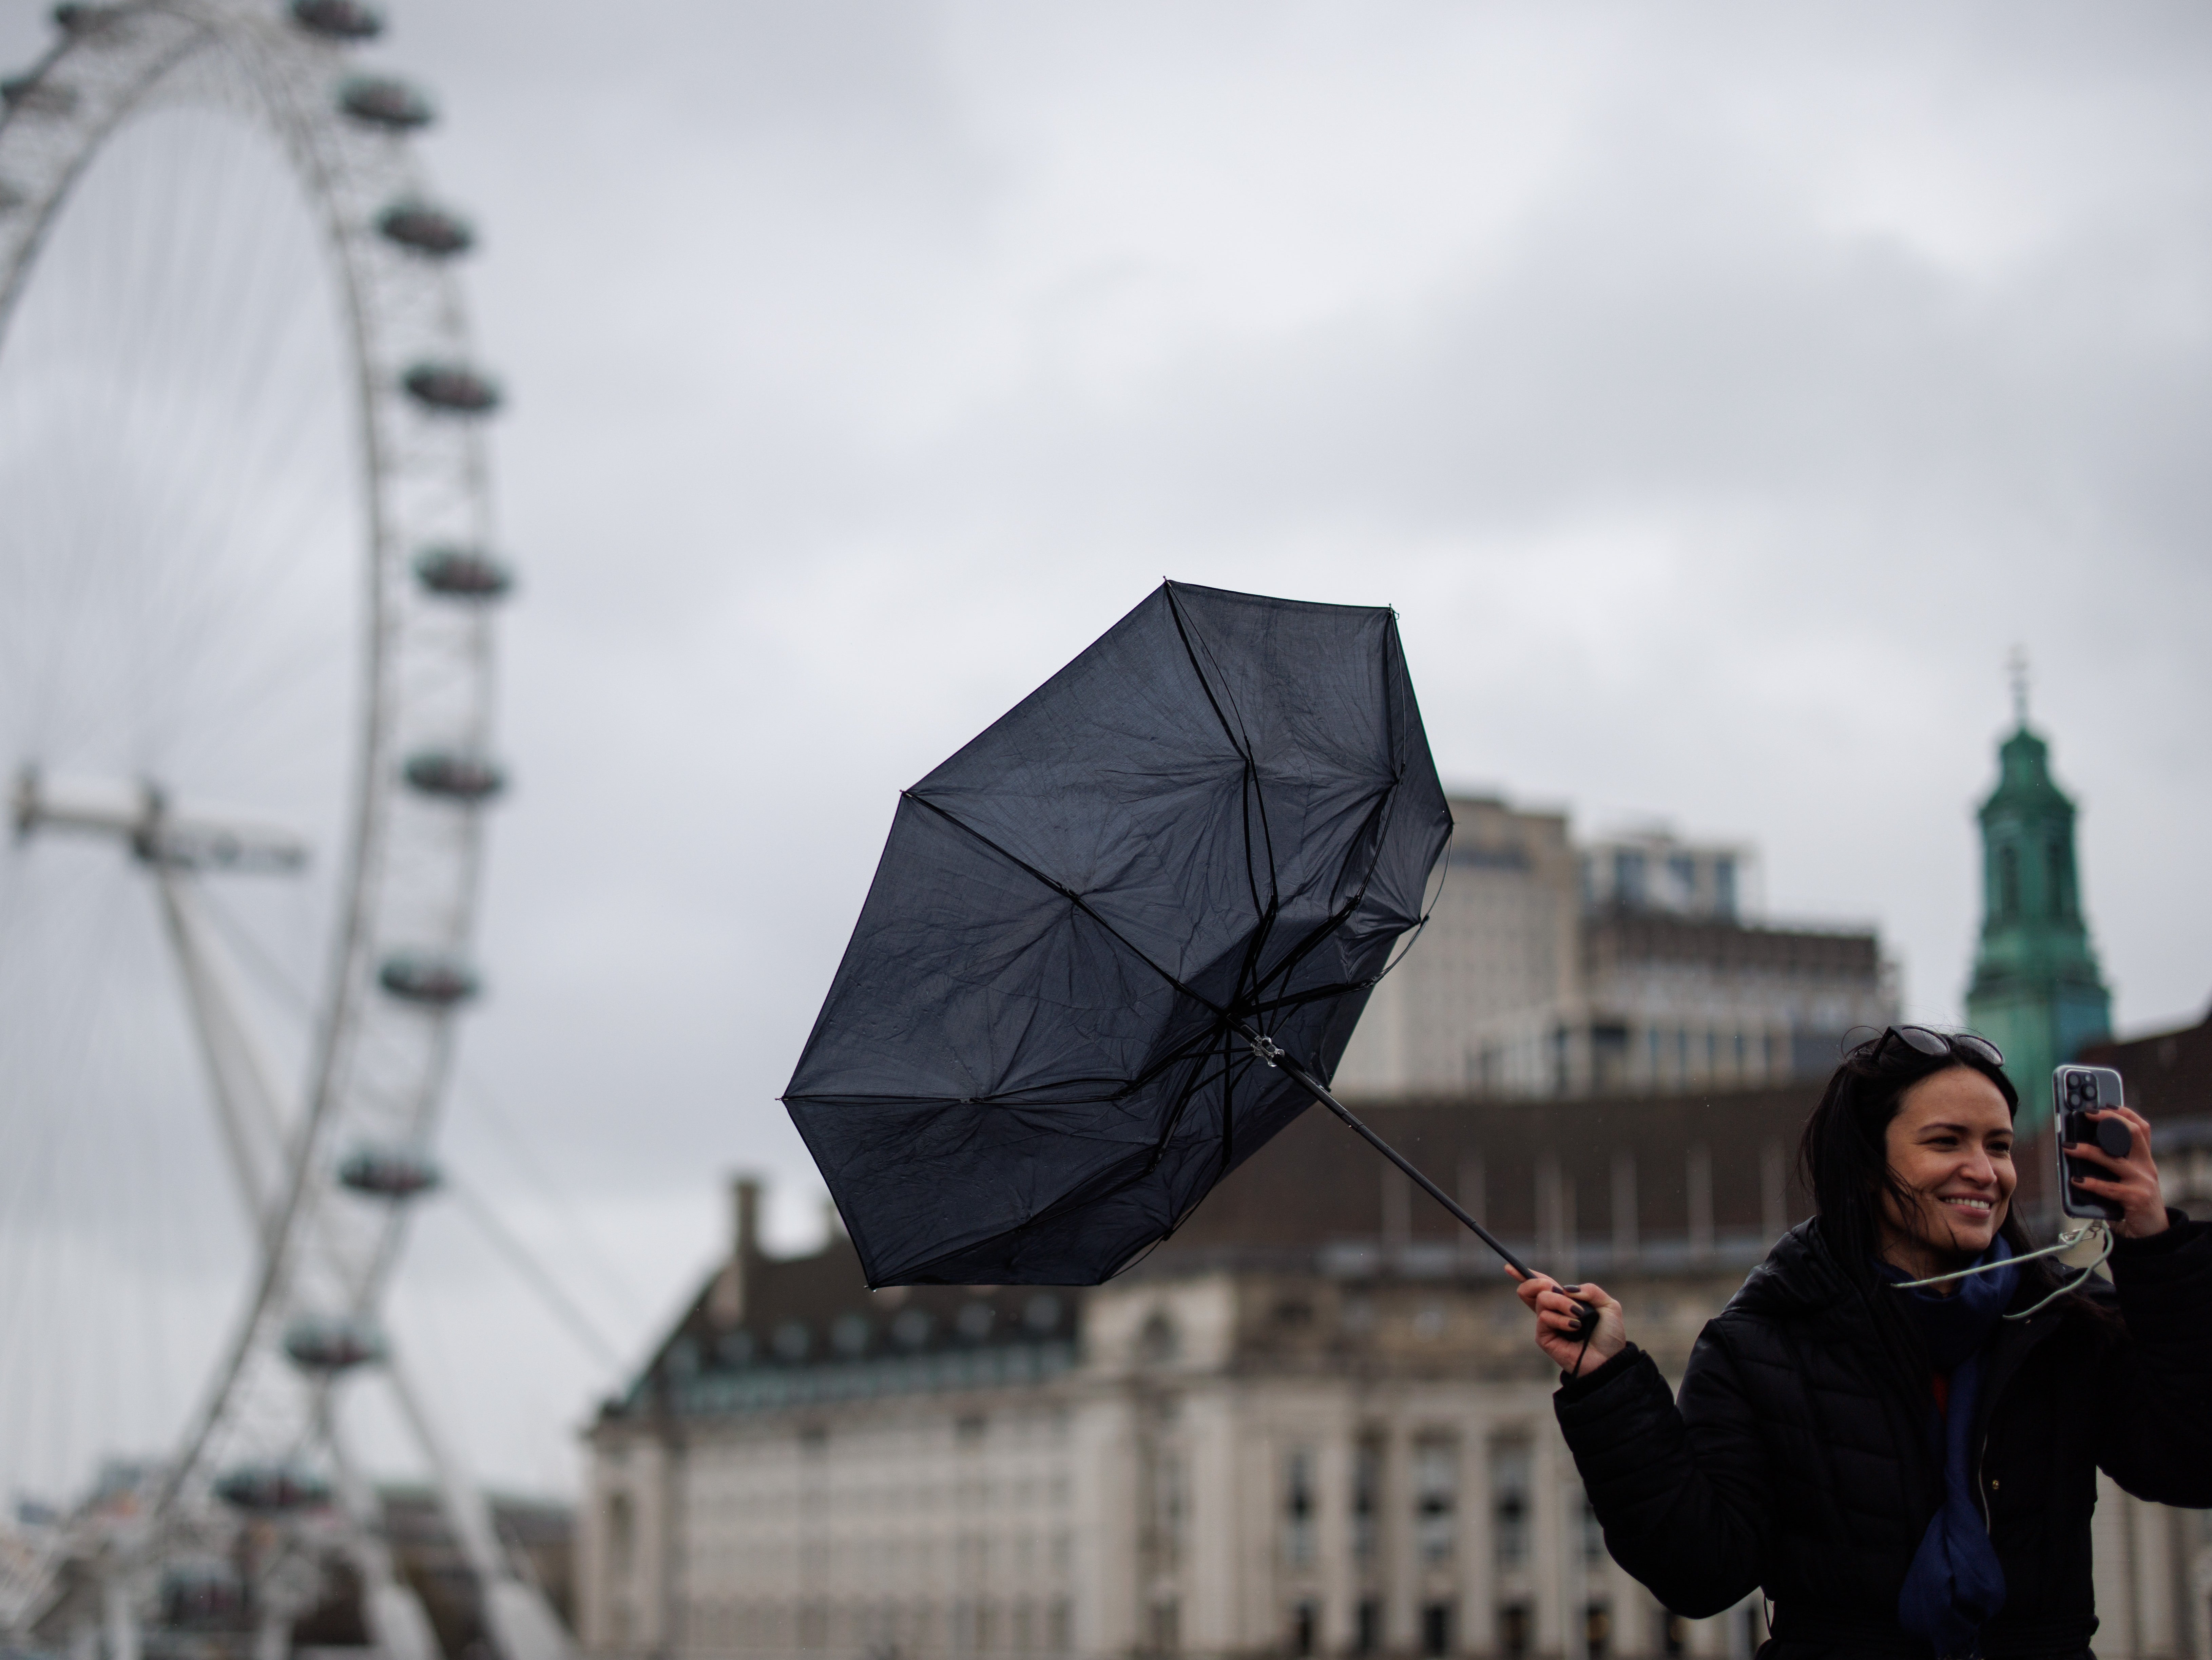 The Met Office warned that heavy rain could cause travel disruption